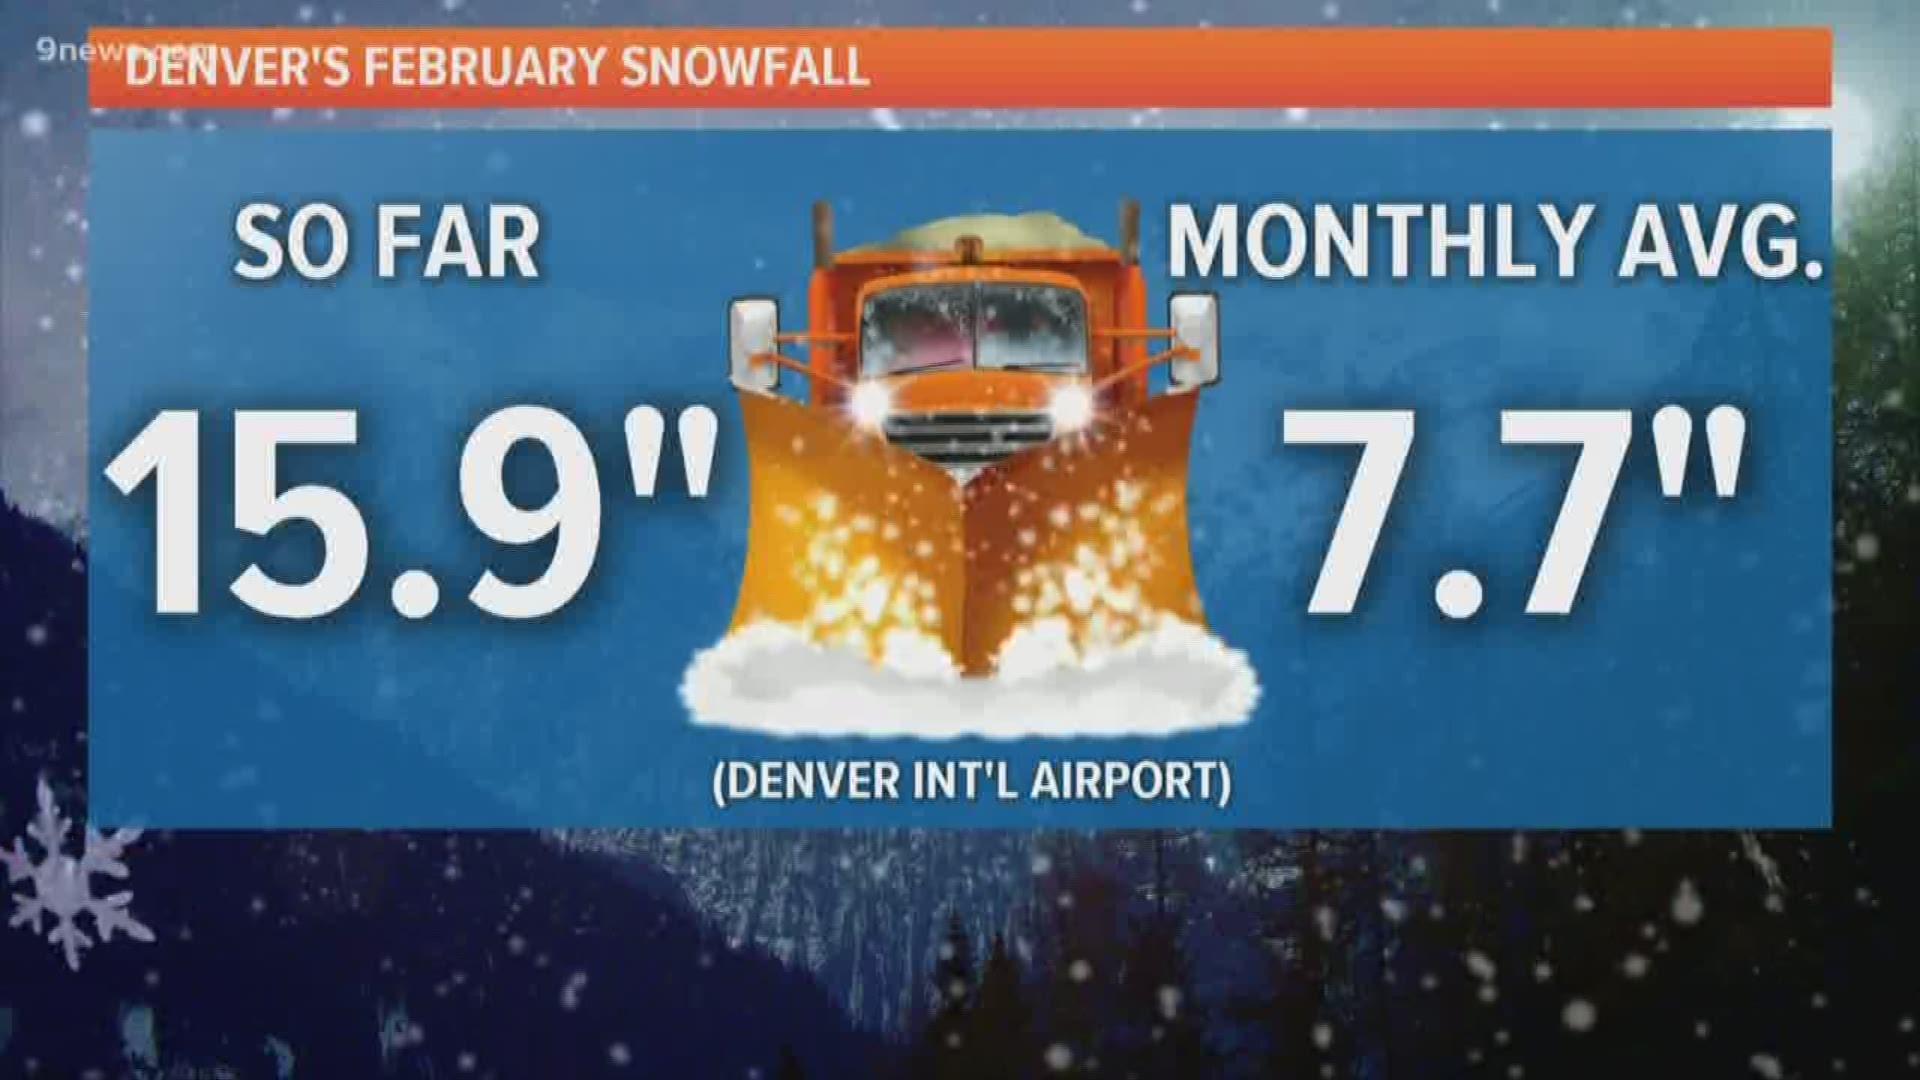 Here we go again! Danielle Grant has the latest as another round of snow moves into the Denver metro area.